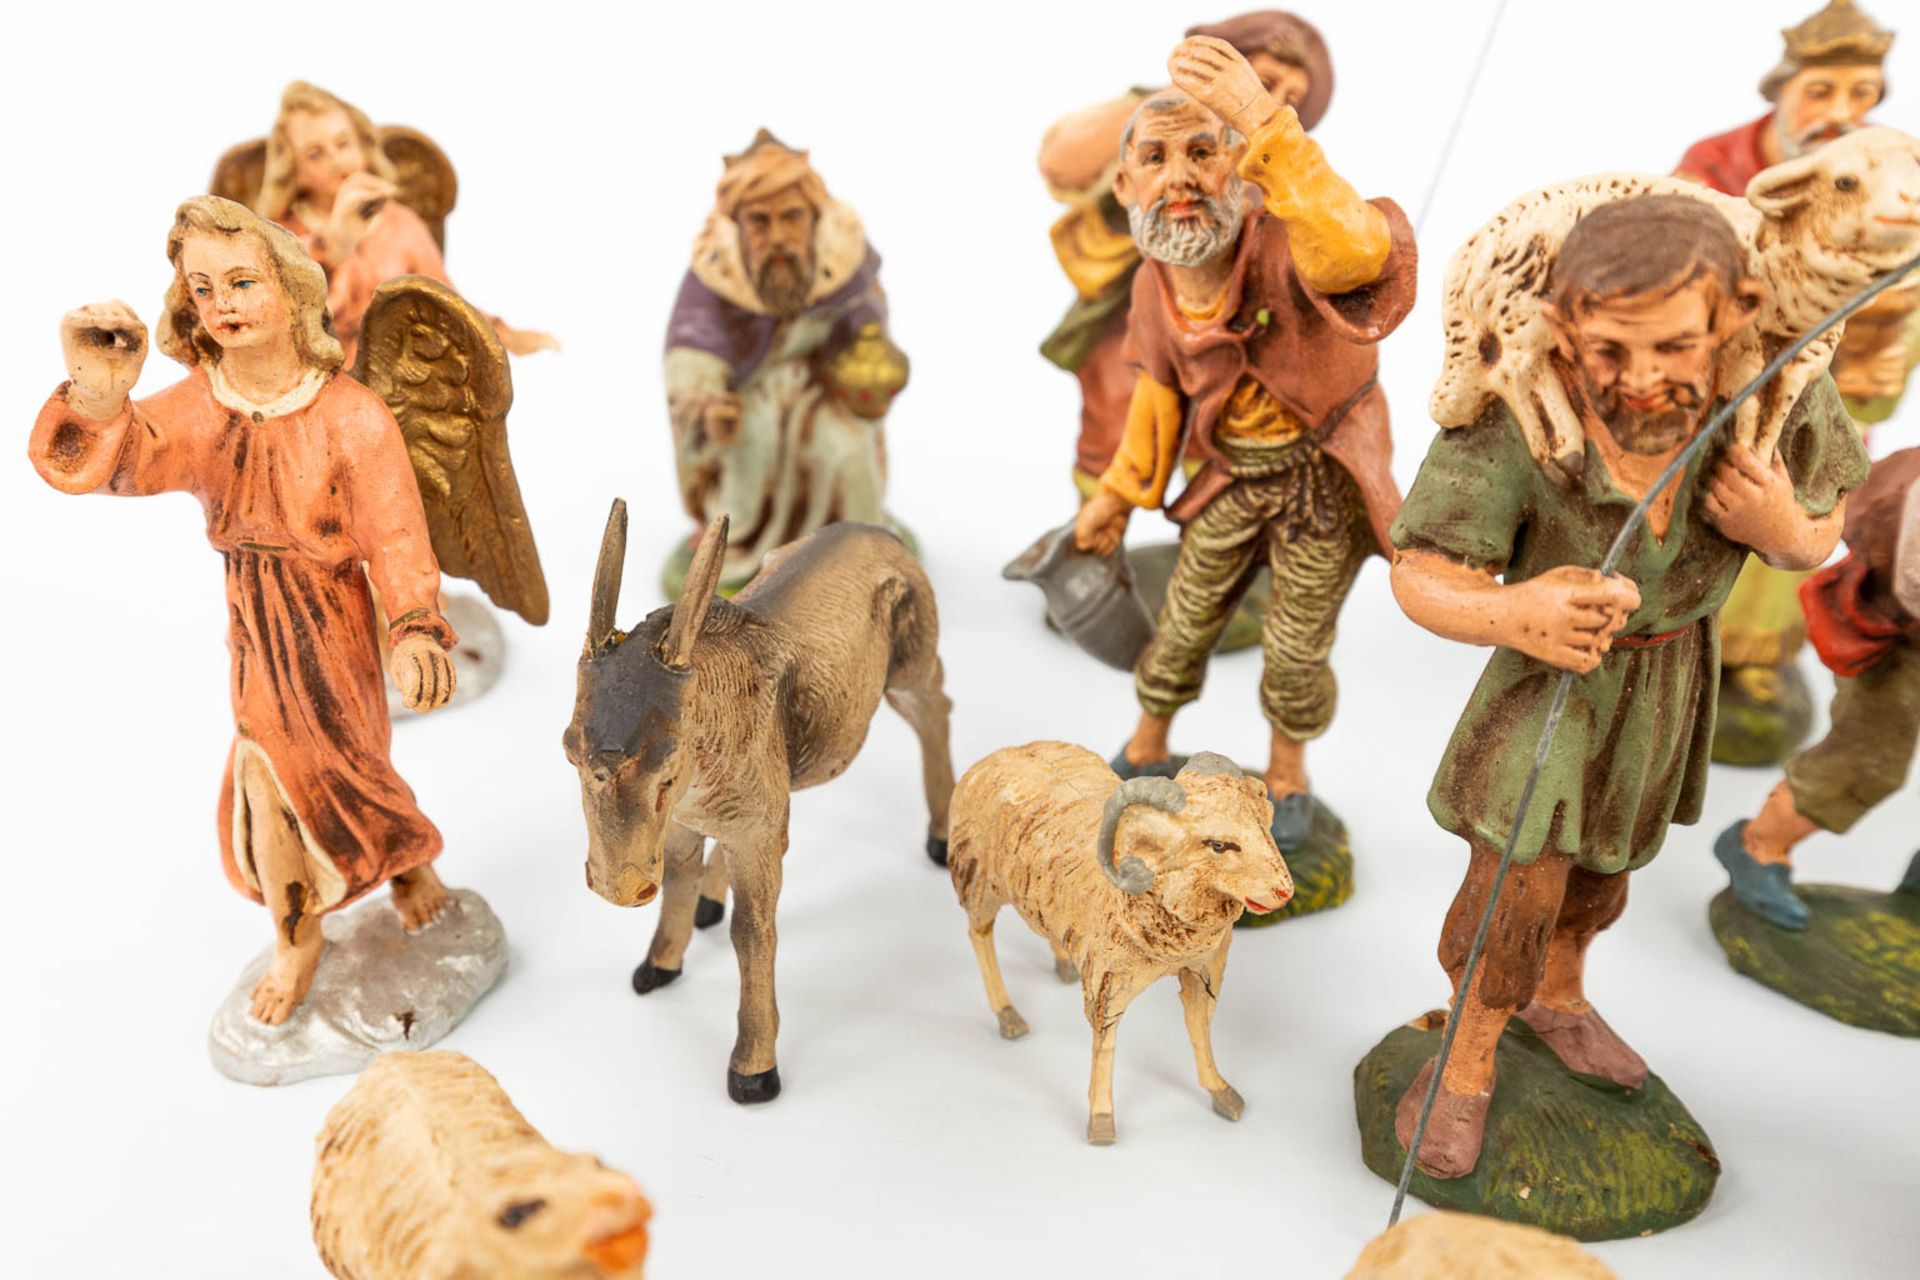 A large and extended Nativity scene with figurines and animals made of papier maché. - Image 19 of 20